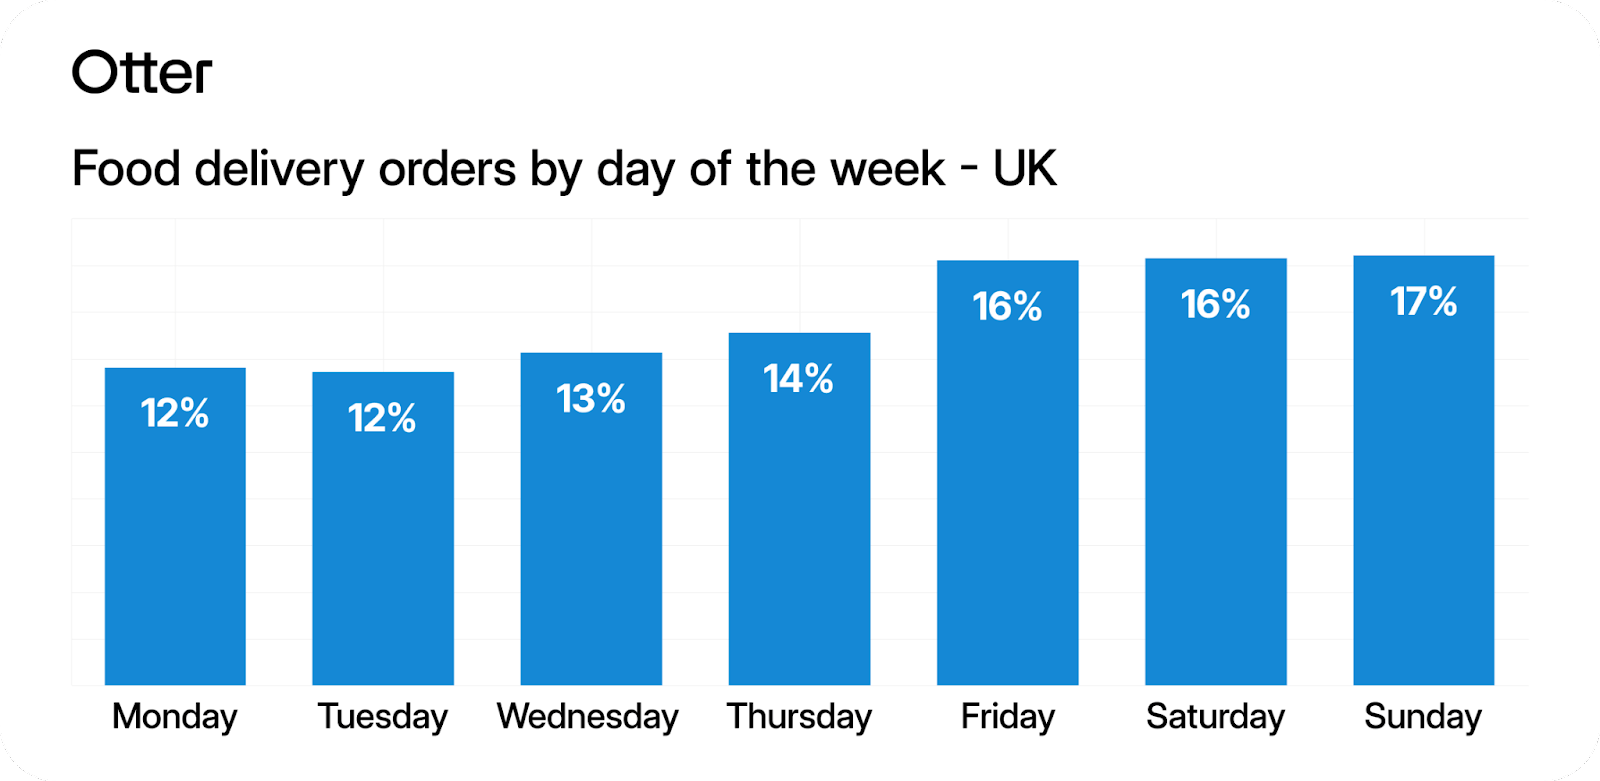 Food delivery orders by day of the week in the UK